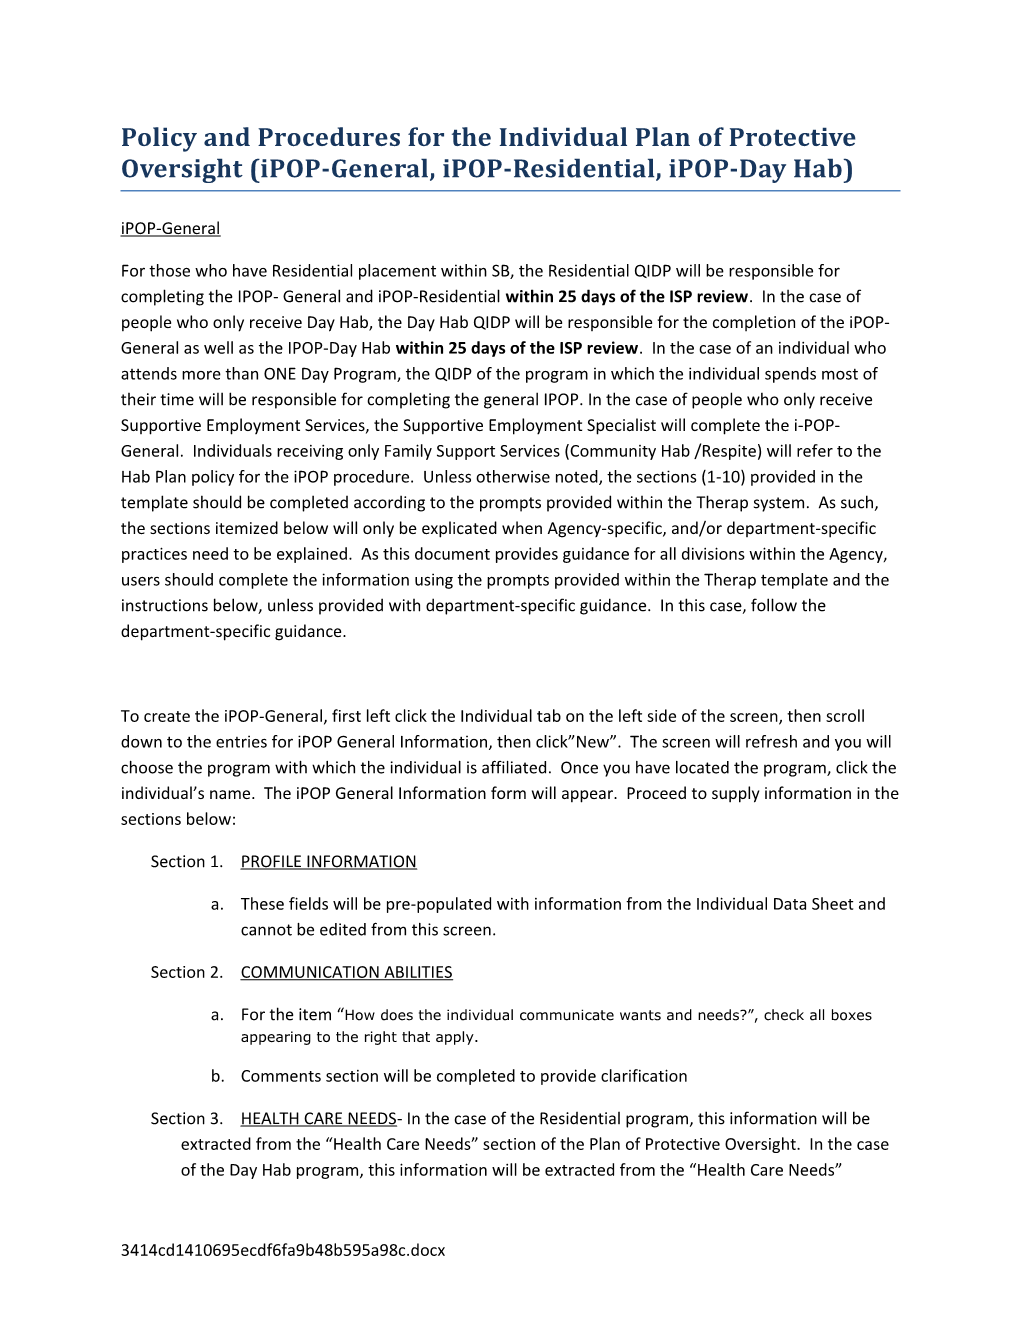 Policy and Procedures for the Individual Plan of Protective Oversight (Ipop-General